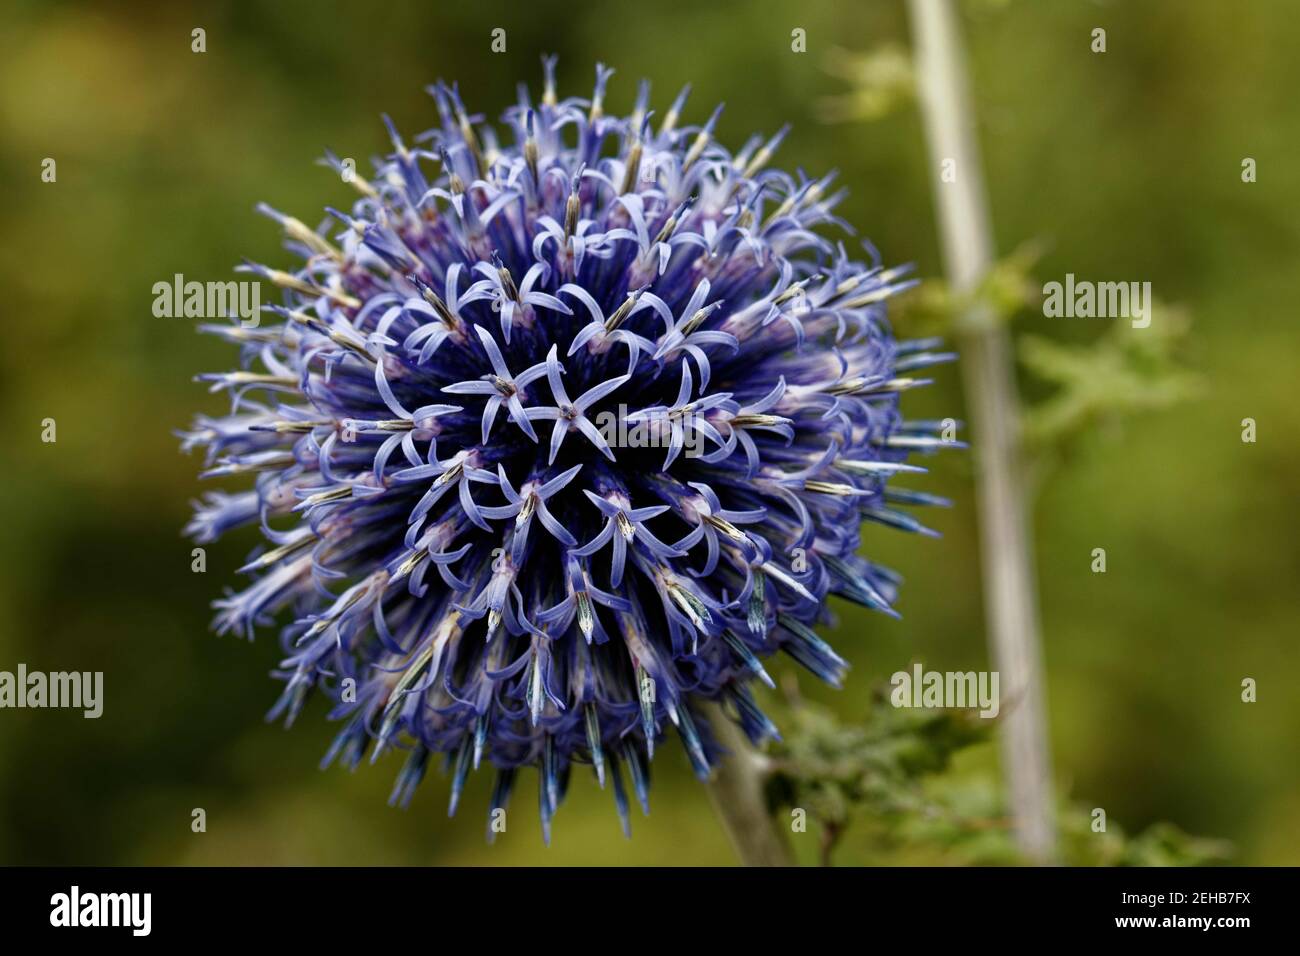 Echinops ritro, the southern globethistle, is a species of flowering plant in the sunflower family, native to southern and eastern Europe. Stock Photo